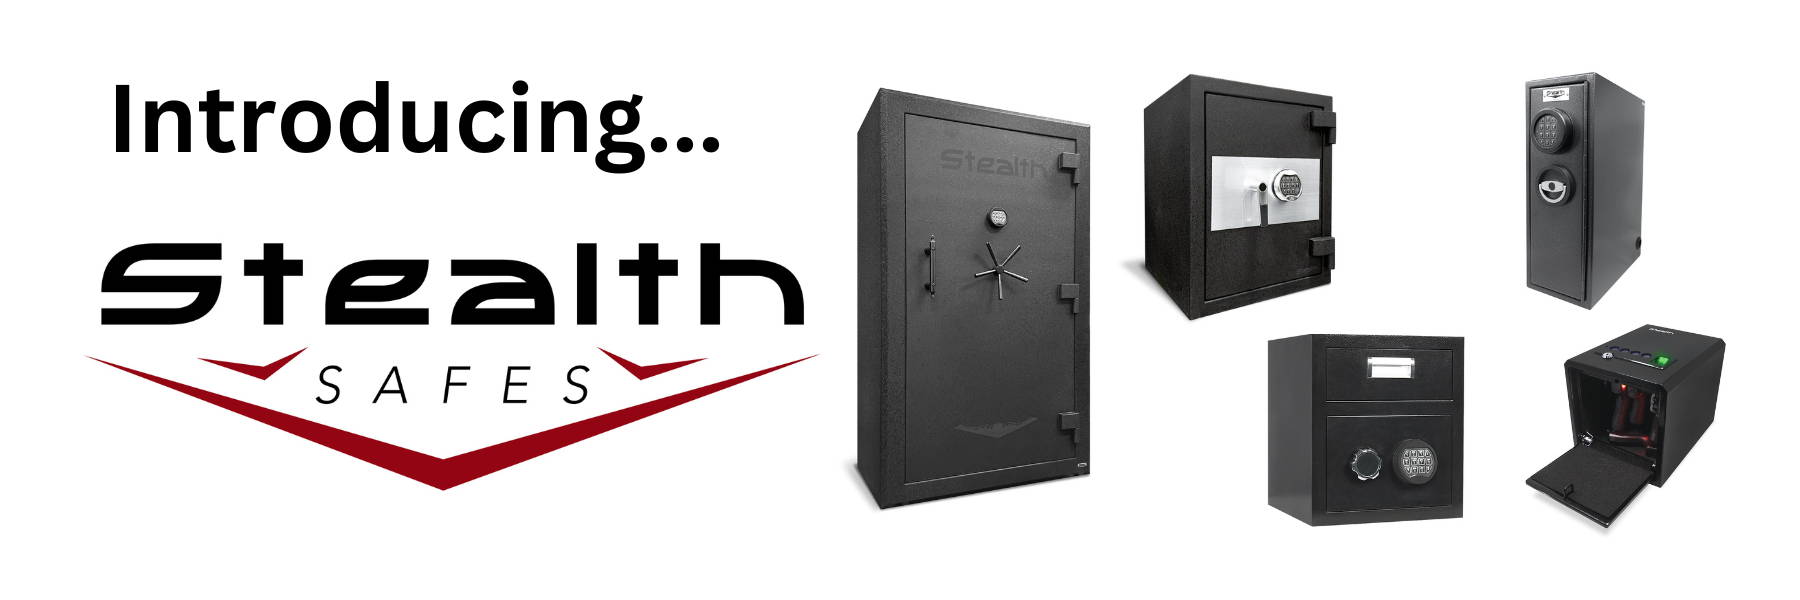 Introducing Stealth Safes